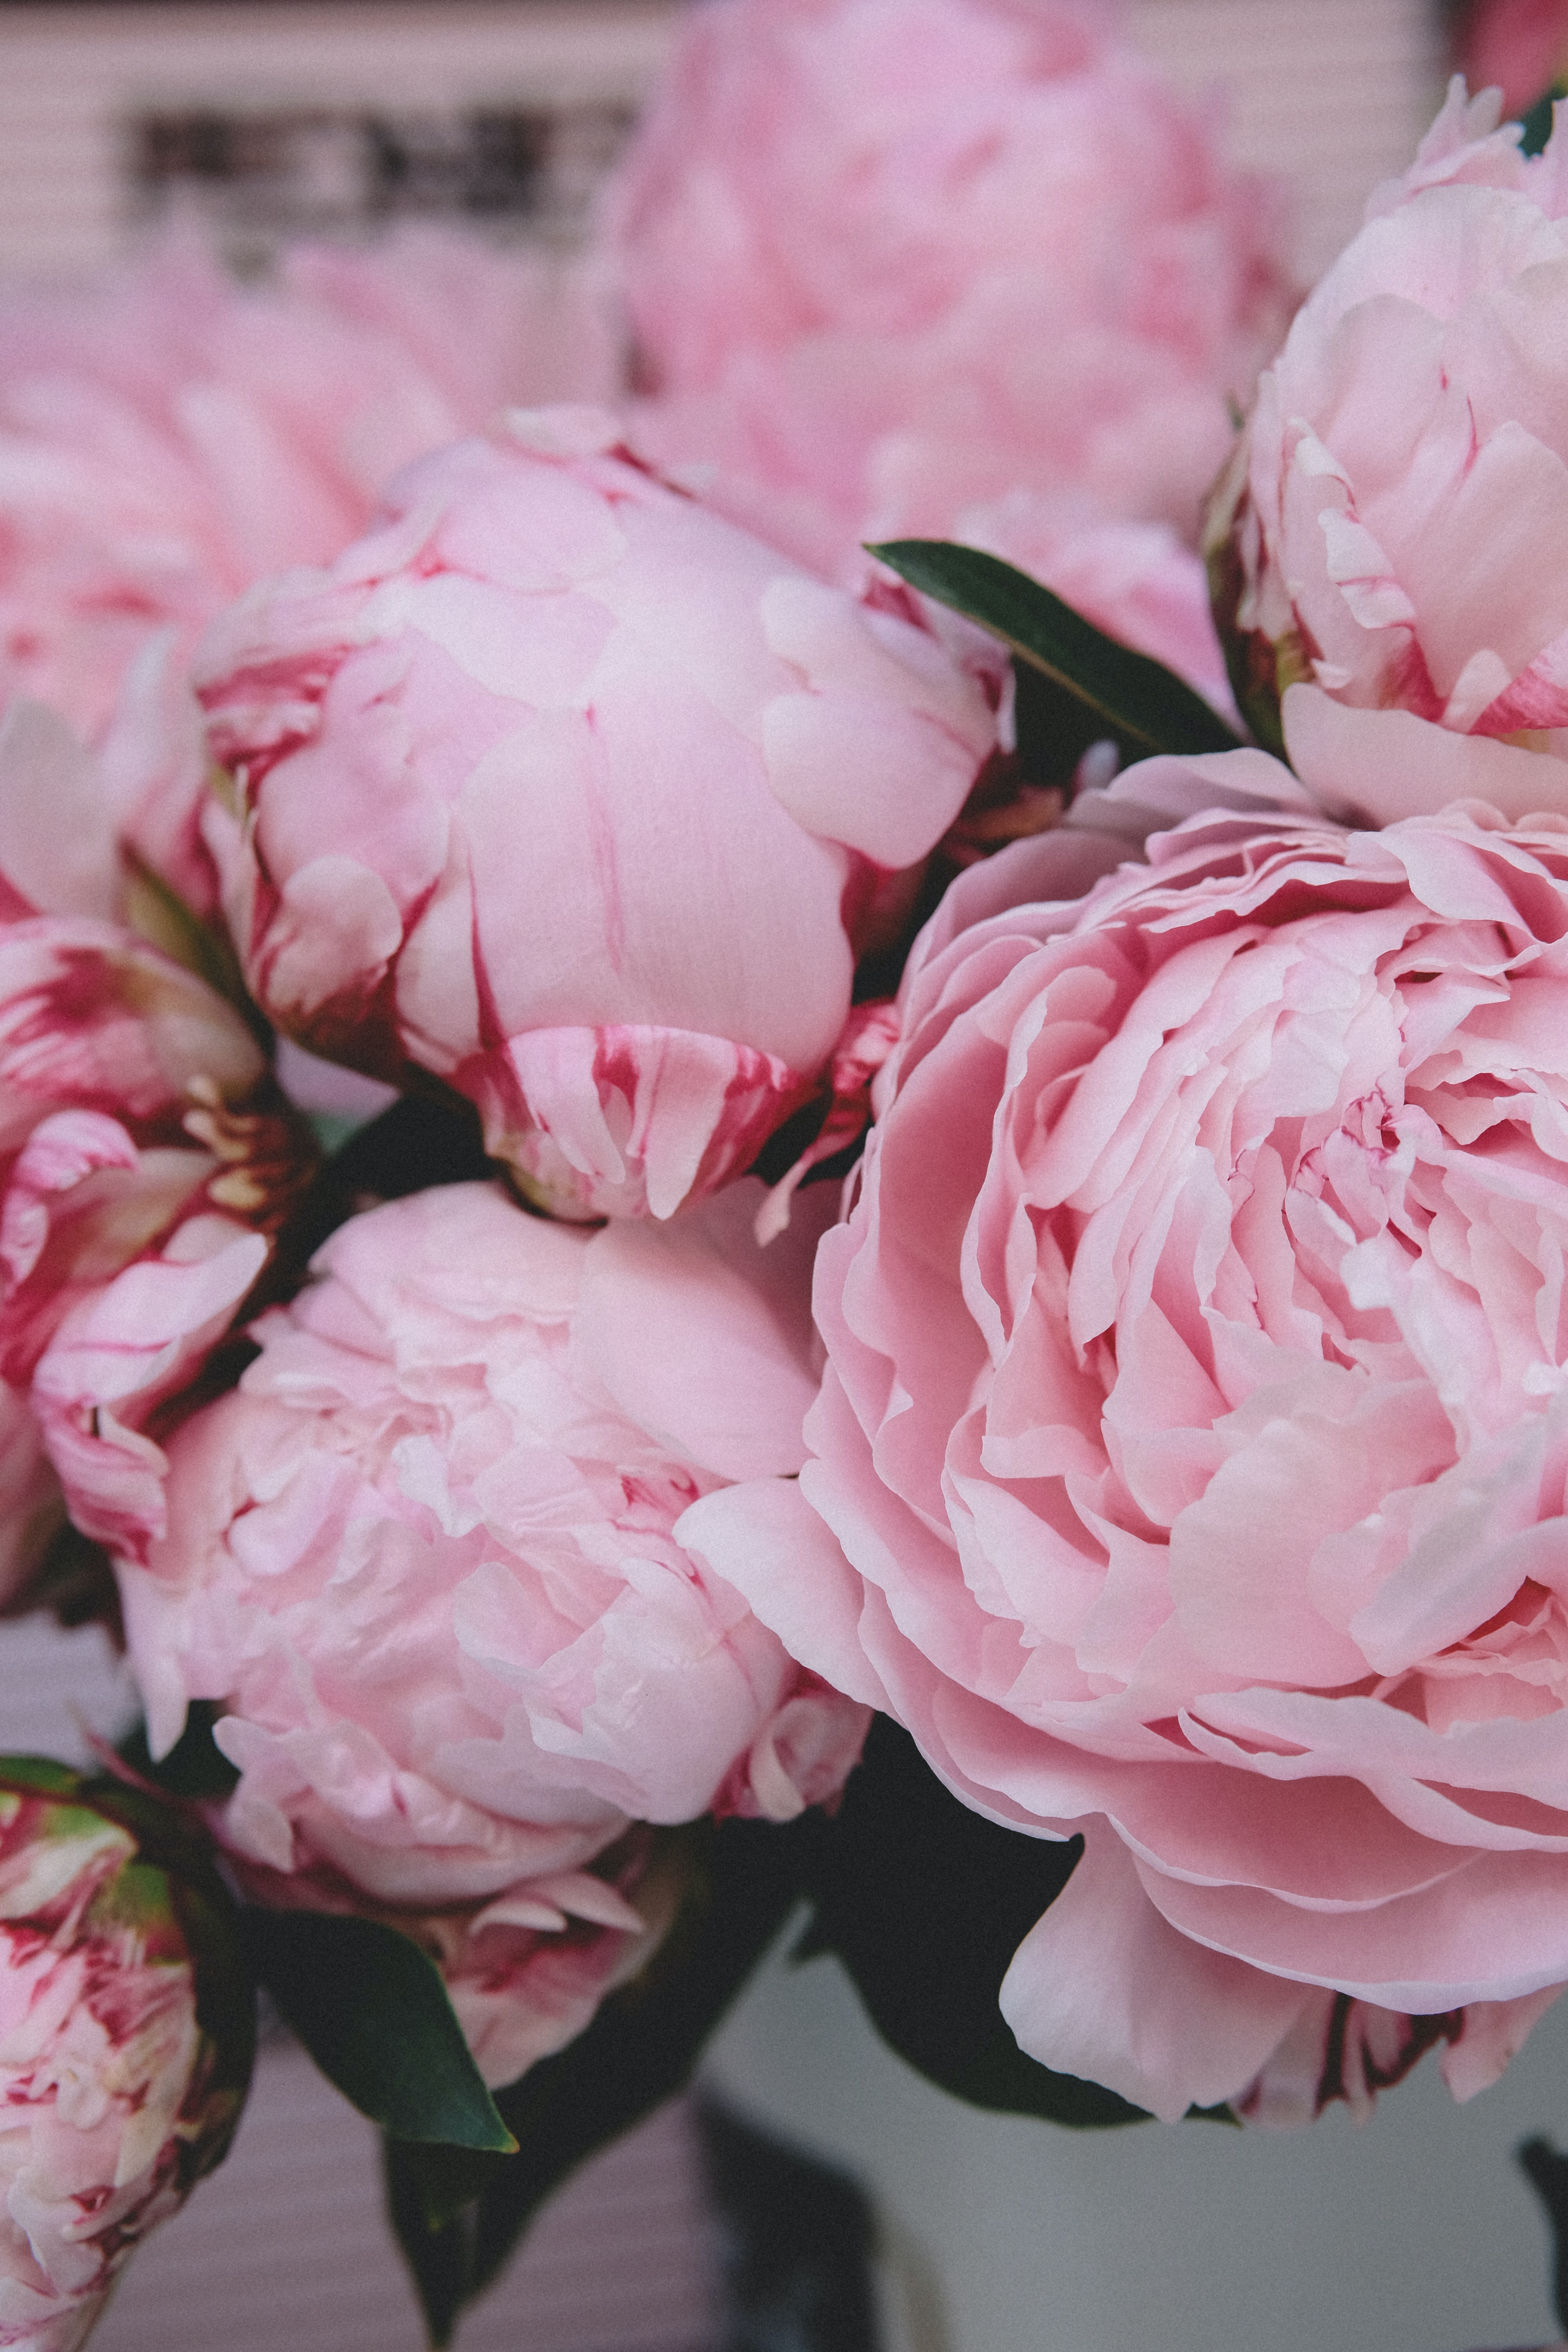 Peonies and rose